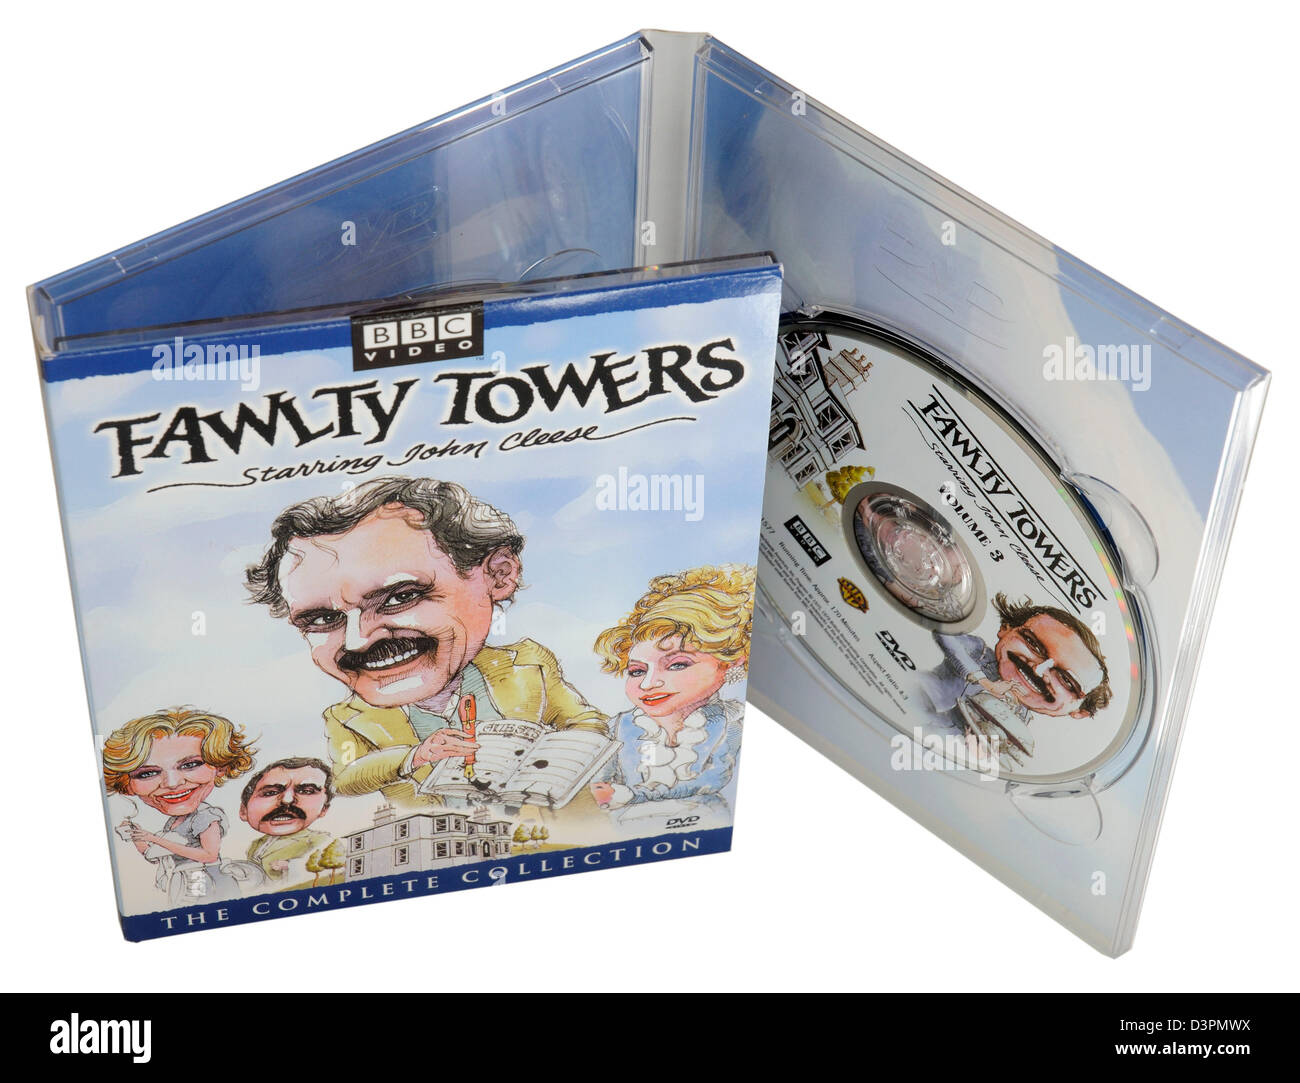 Fawlty Towers complete comedy series DVD Stock Photo